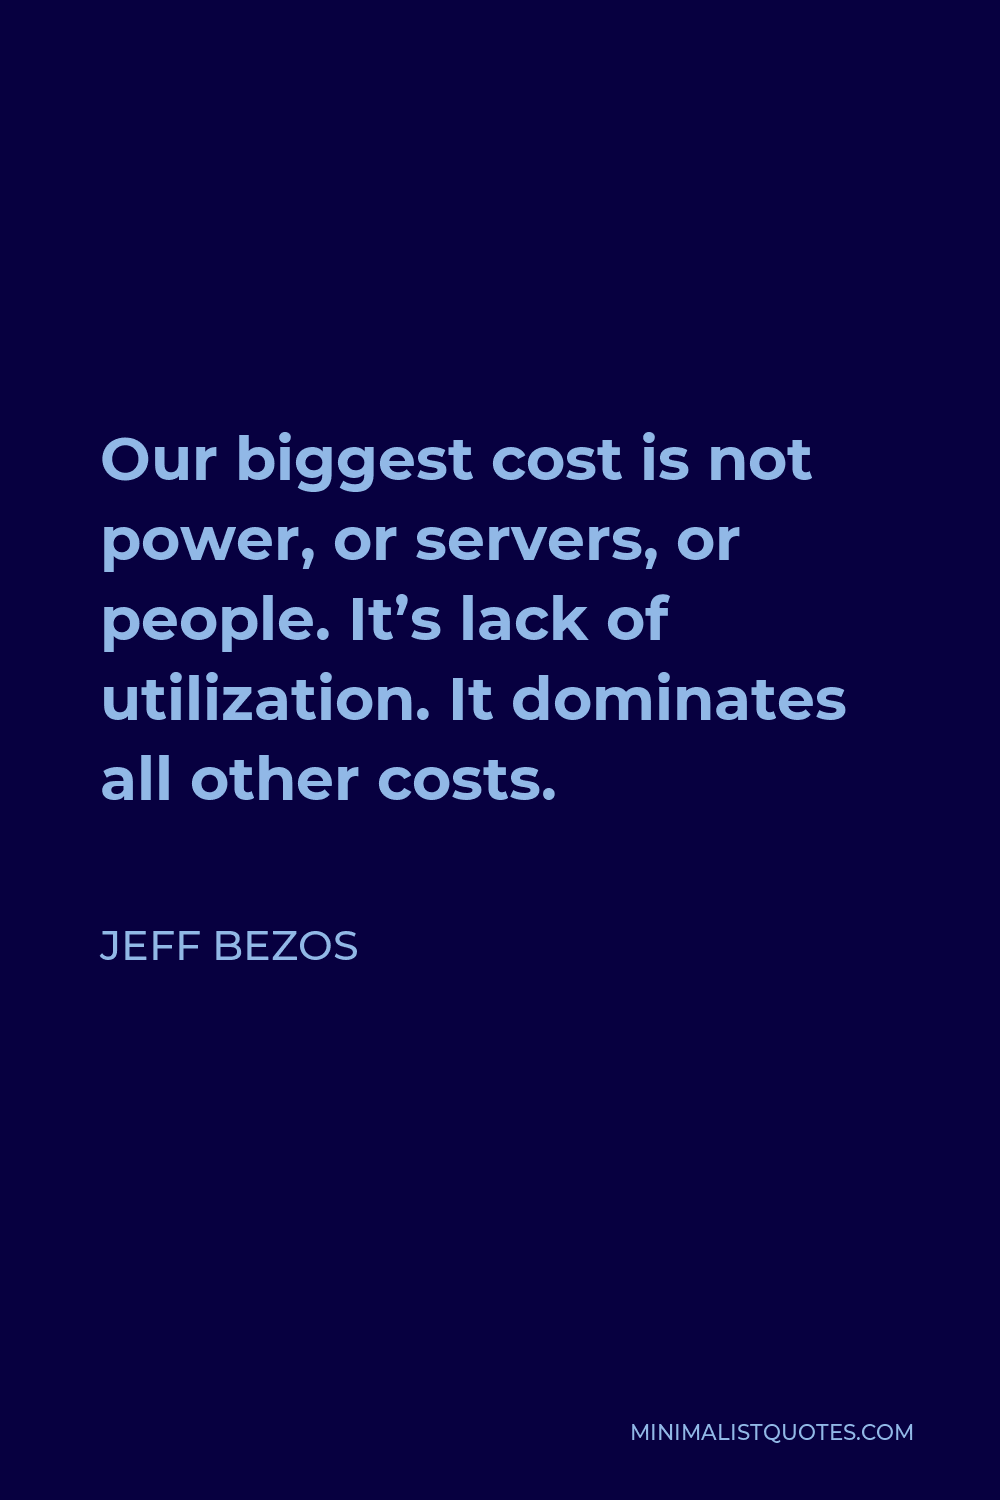 Jeff Bezos Quote - Our biggest cost is not power, or servers, or people. It’s lack of utilization. It dominates all other costs.